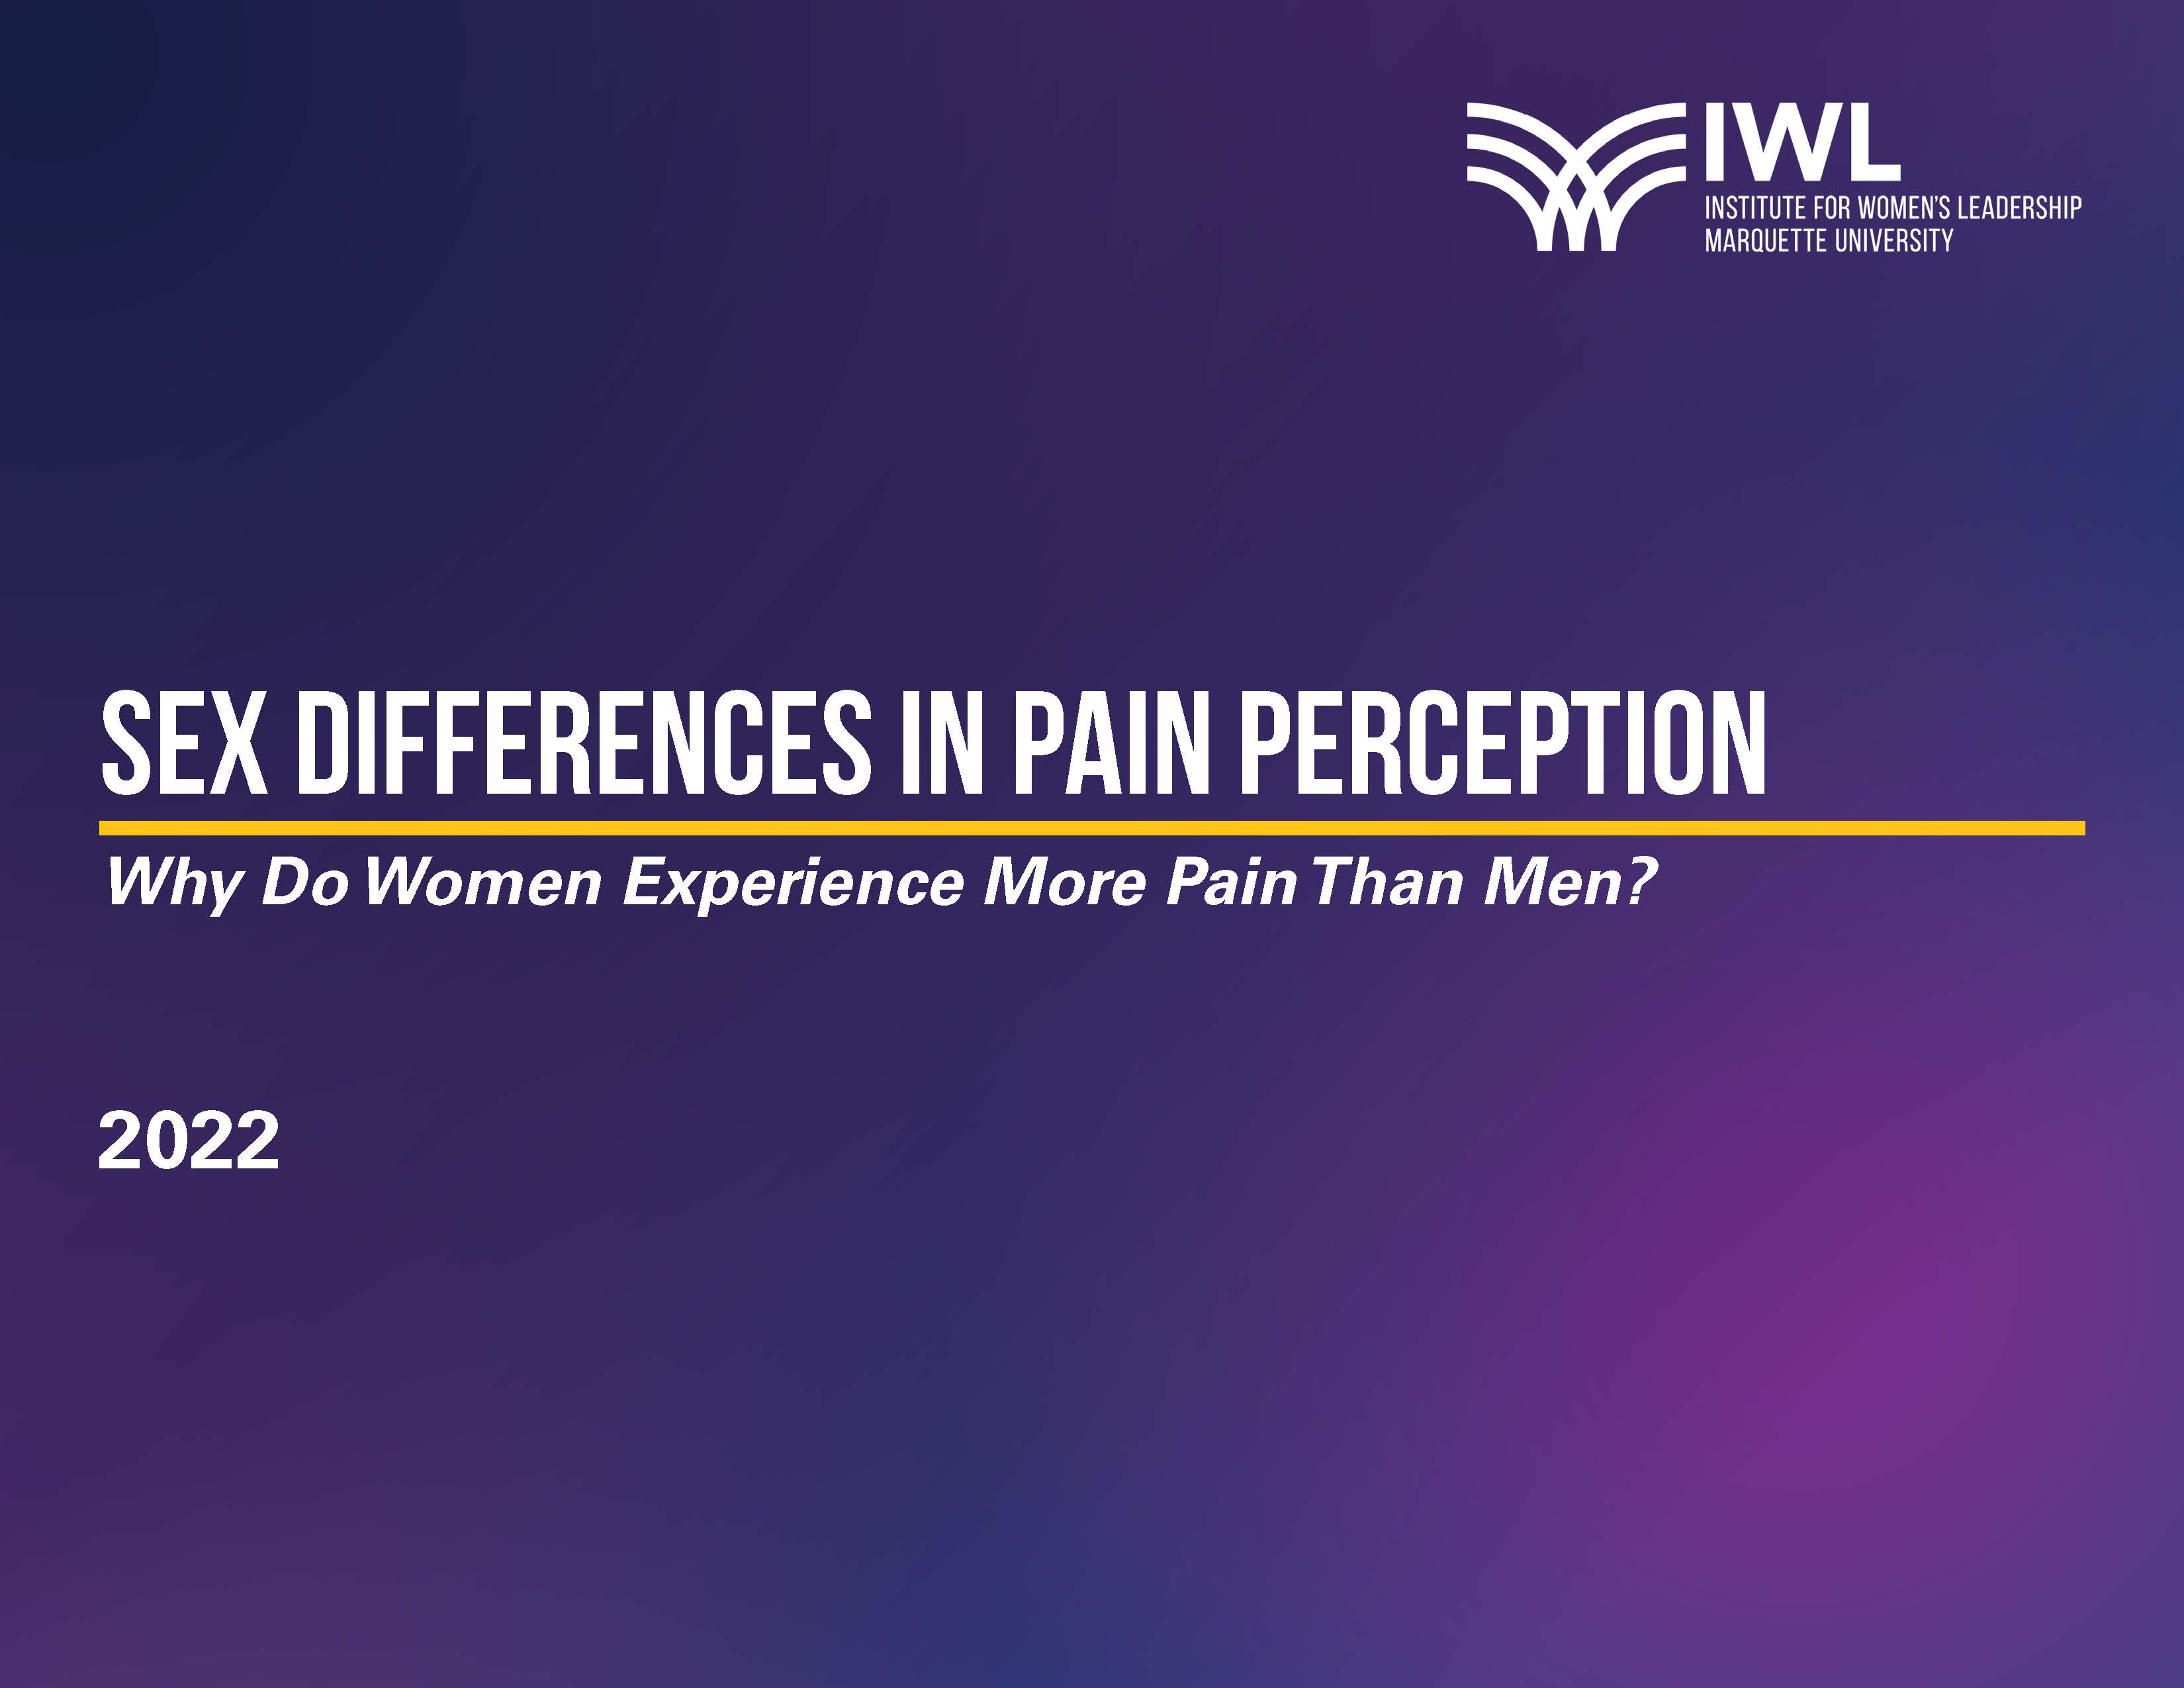 Front Cover of Sex Differences in Pain Perception (white paper)